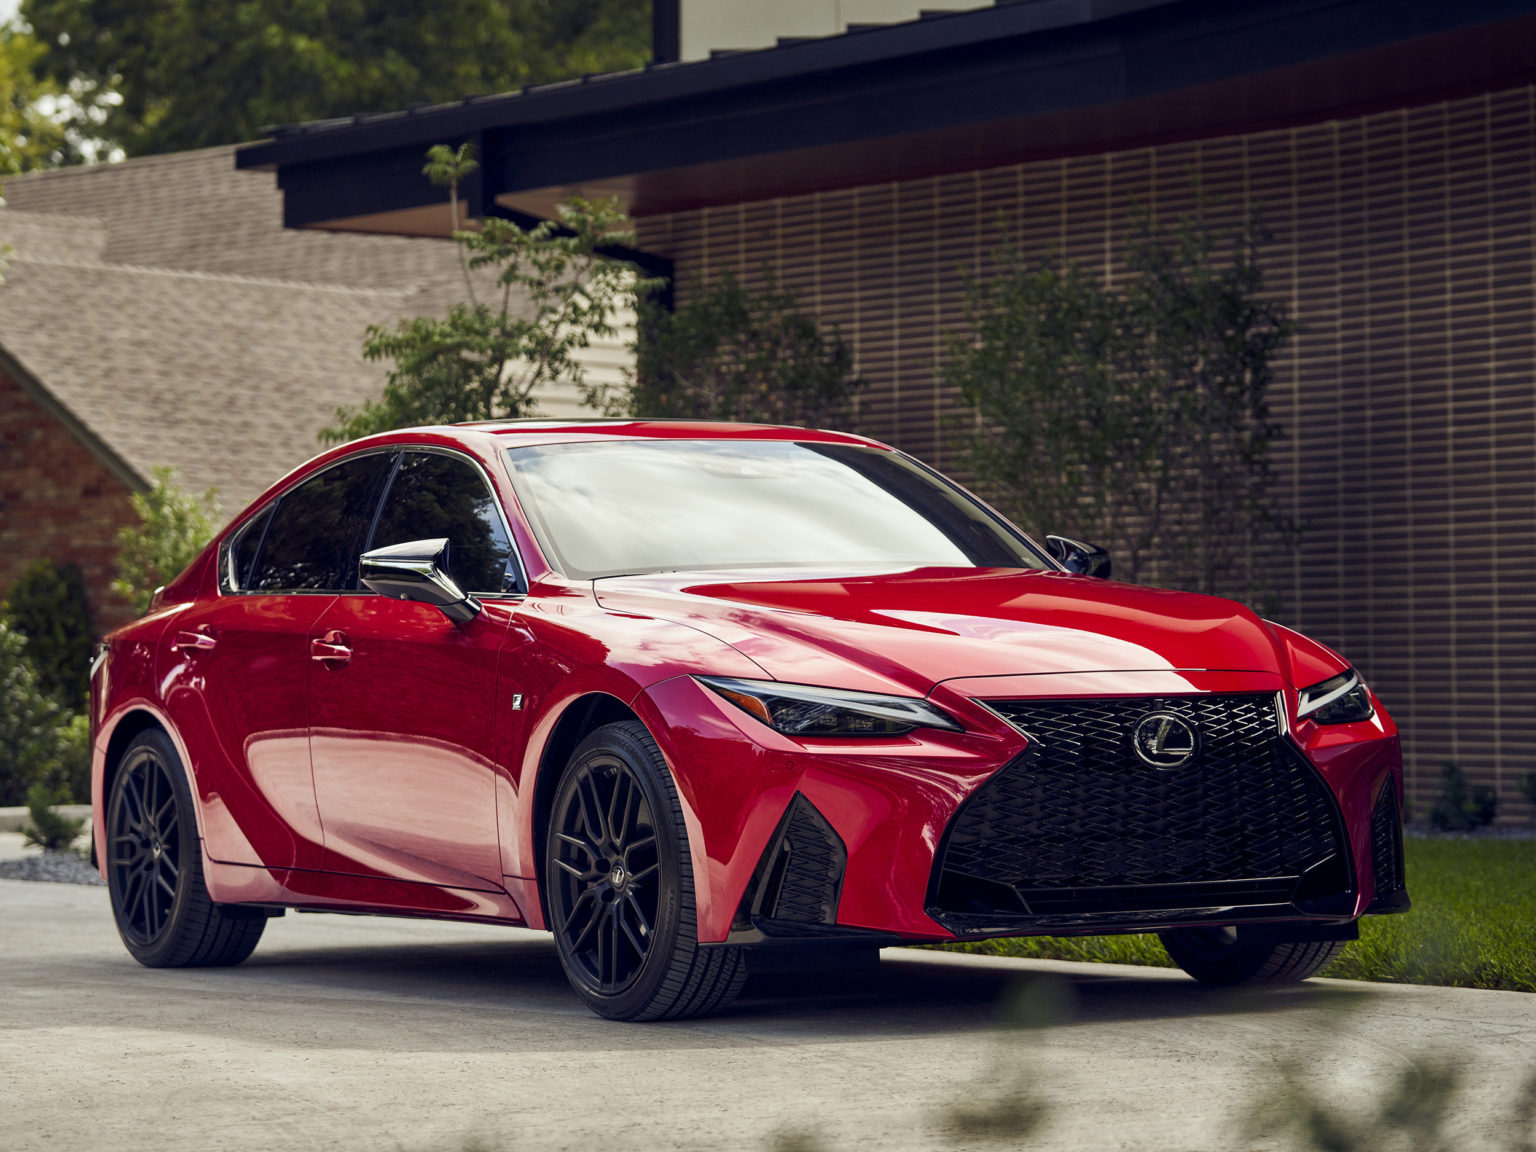 Lexus has given its IS 350 new fascia and performance chops for the 2021 model year.